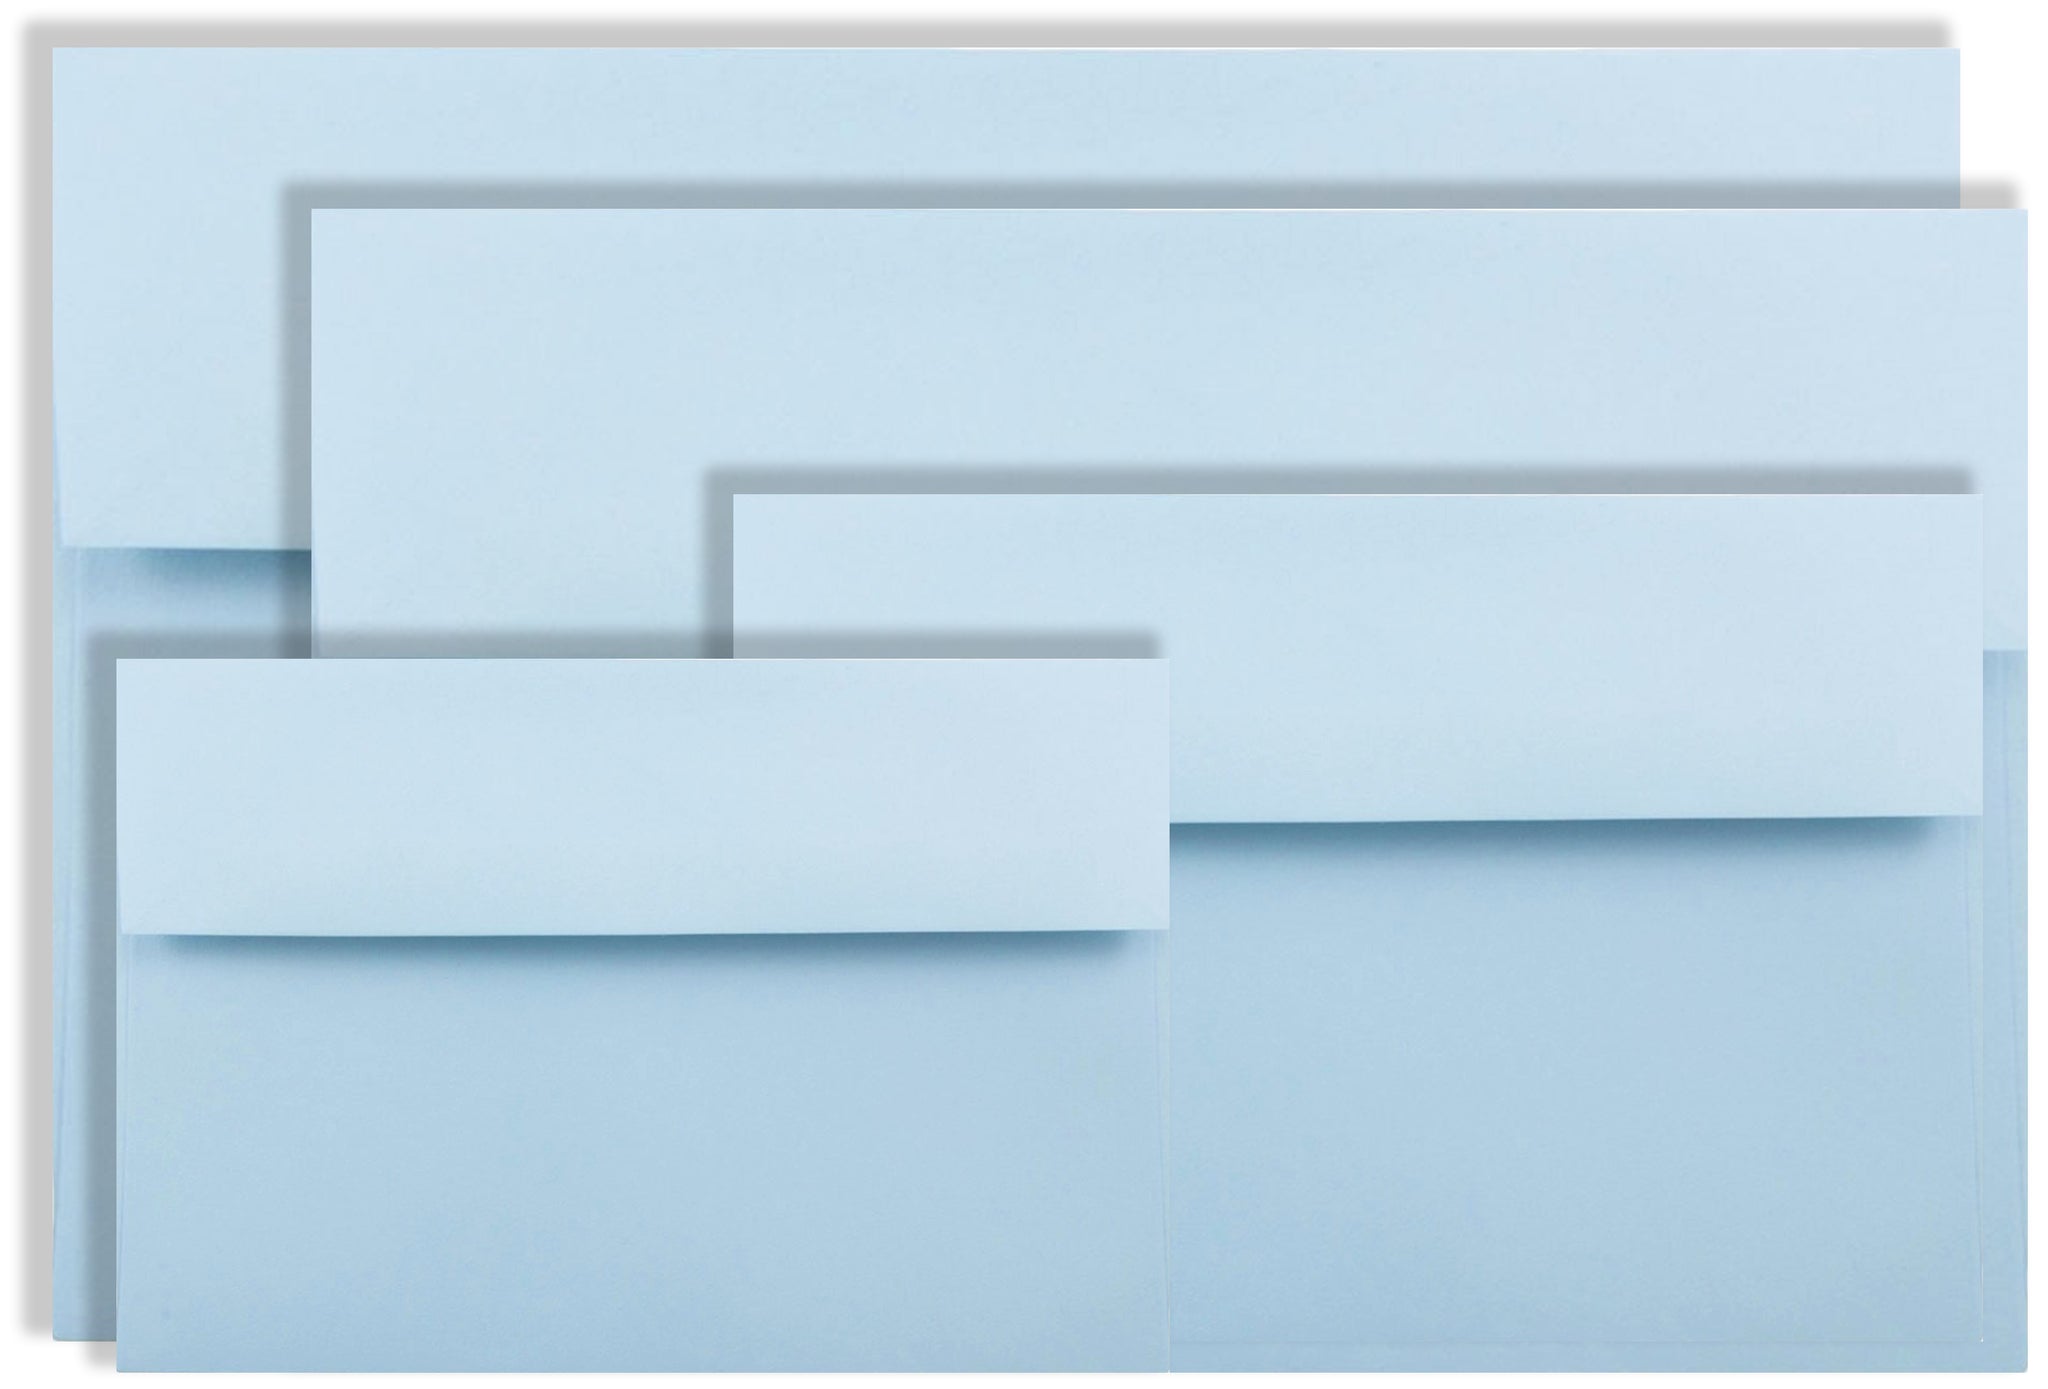 EnDoc A6 Blue Envelopes - Can be Used for 4X6 Cards, Invitations, Photos,  Graduation, Baby Shower, Weddings, Business, and Mailing - 4 3/4 x 6 1/2